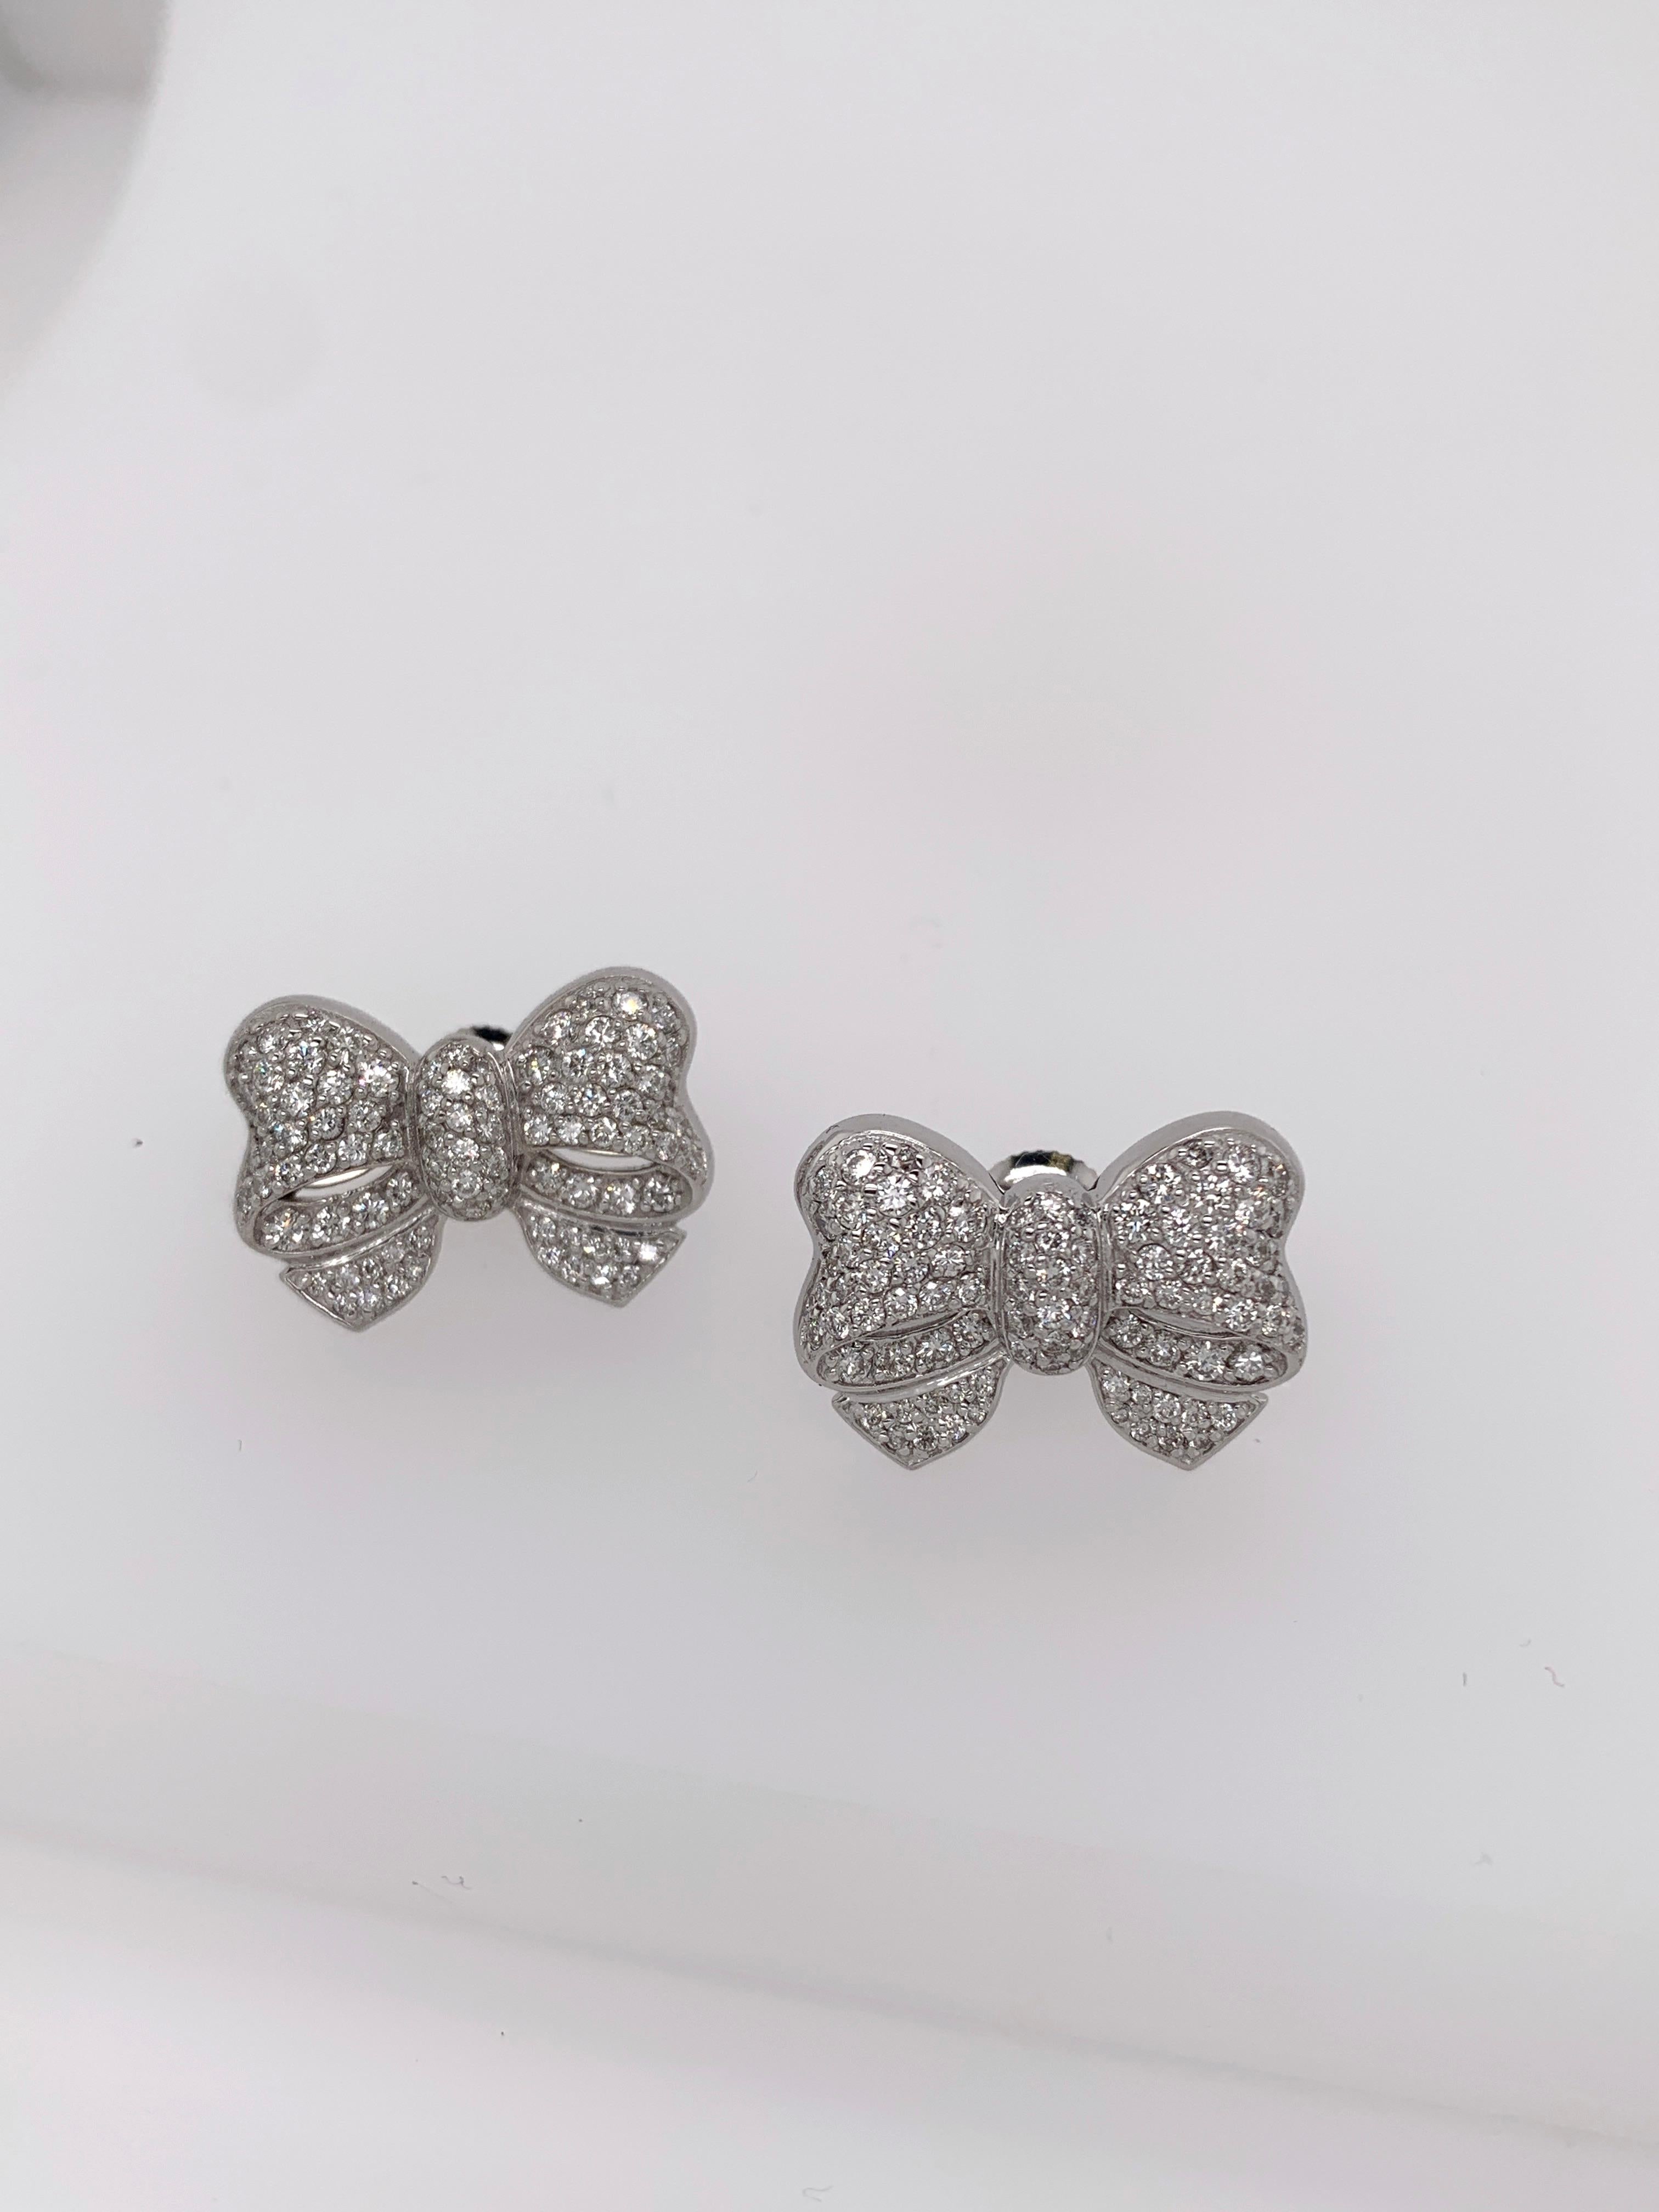 The  Bow Earrings
White Diamonds set on White Gold Bows.
Crafted to order. Please allow up to 3 weeks for delivery.